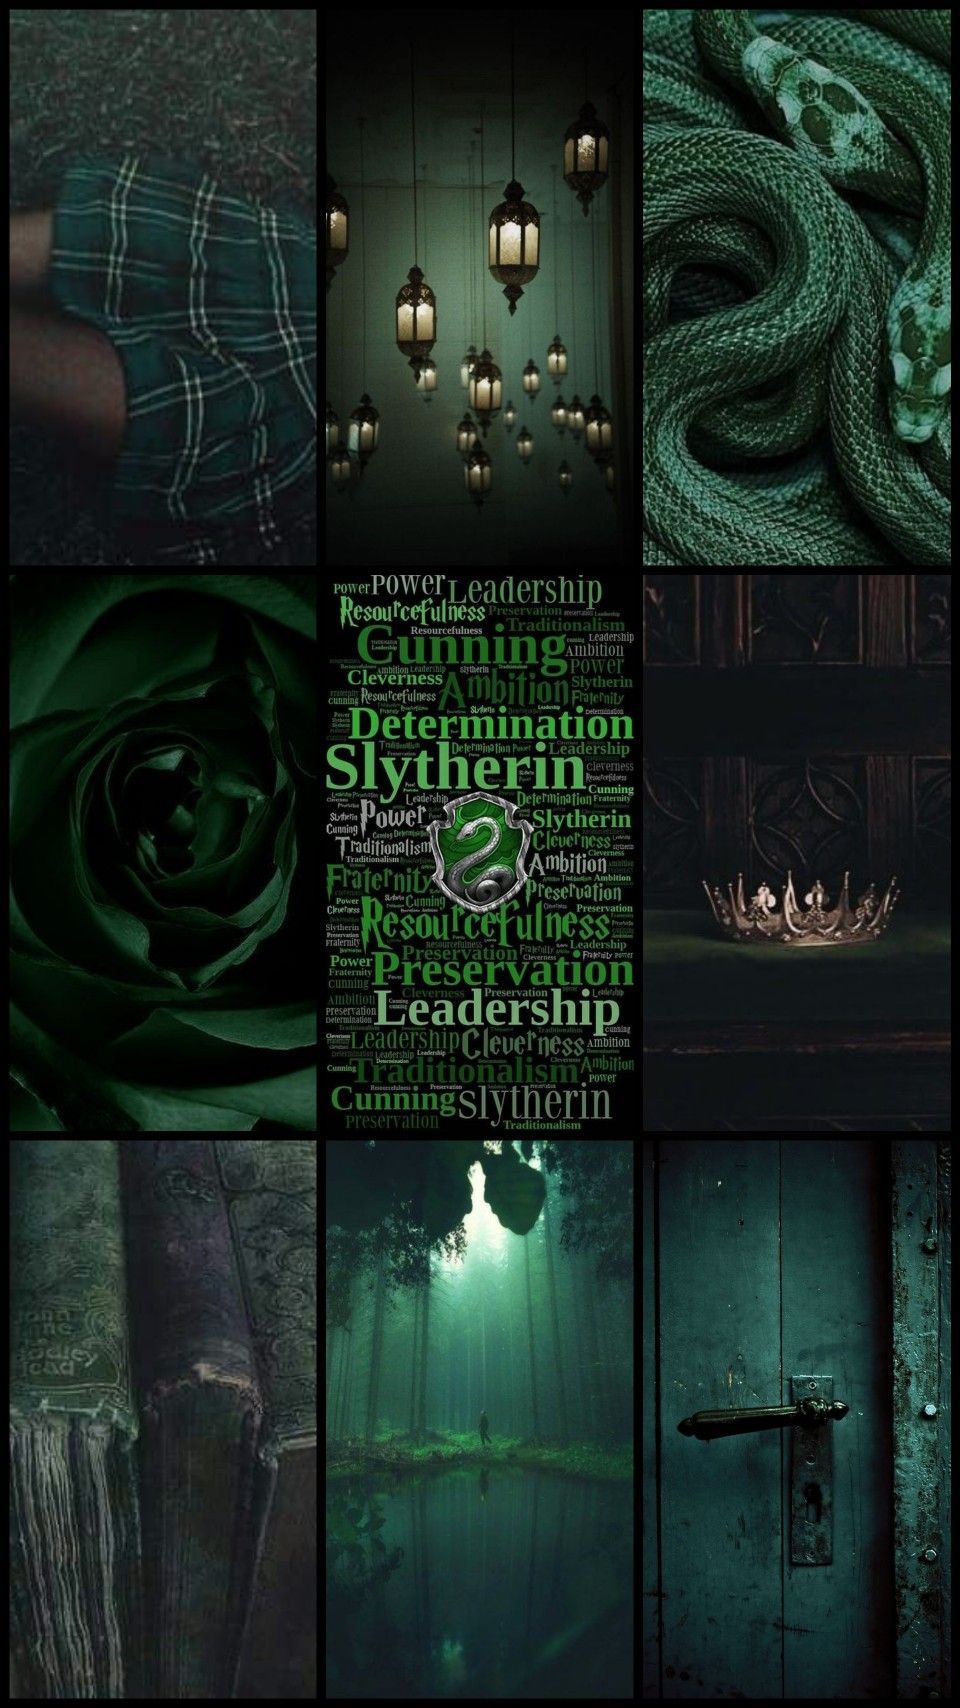 A collage of Slytherin images, including a snake, a rose, a boat, and a door. - Slytherin, Harry Potter